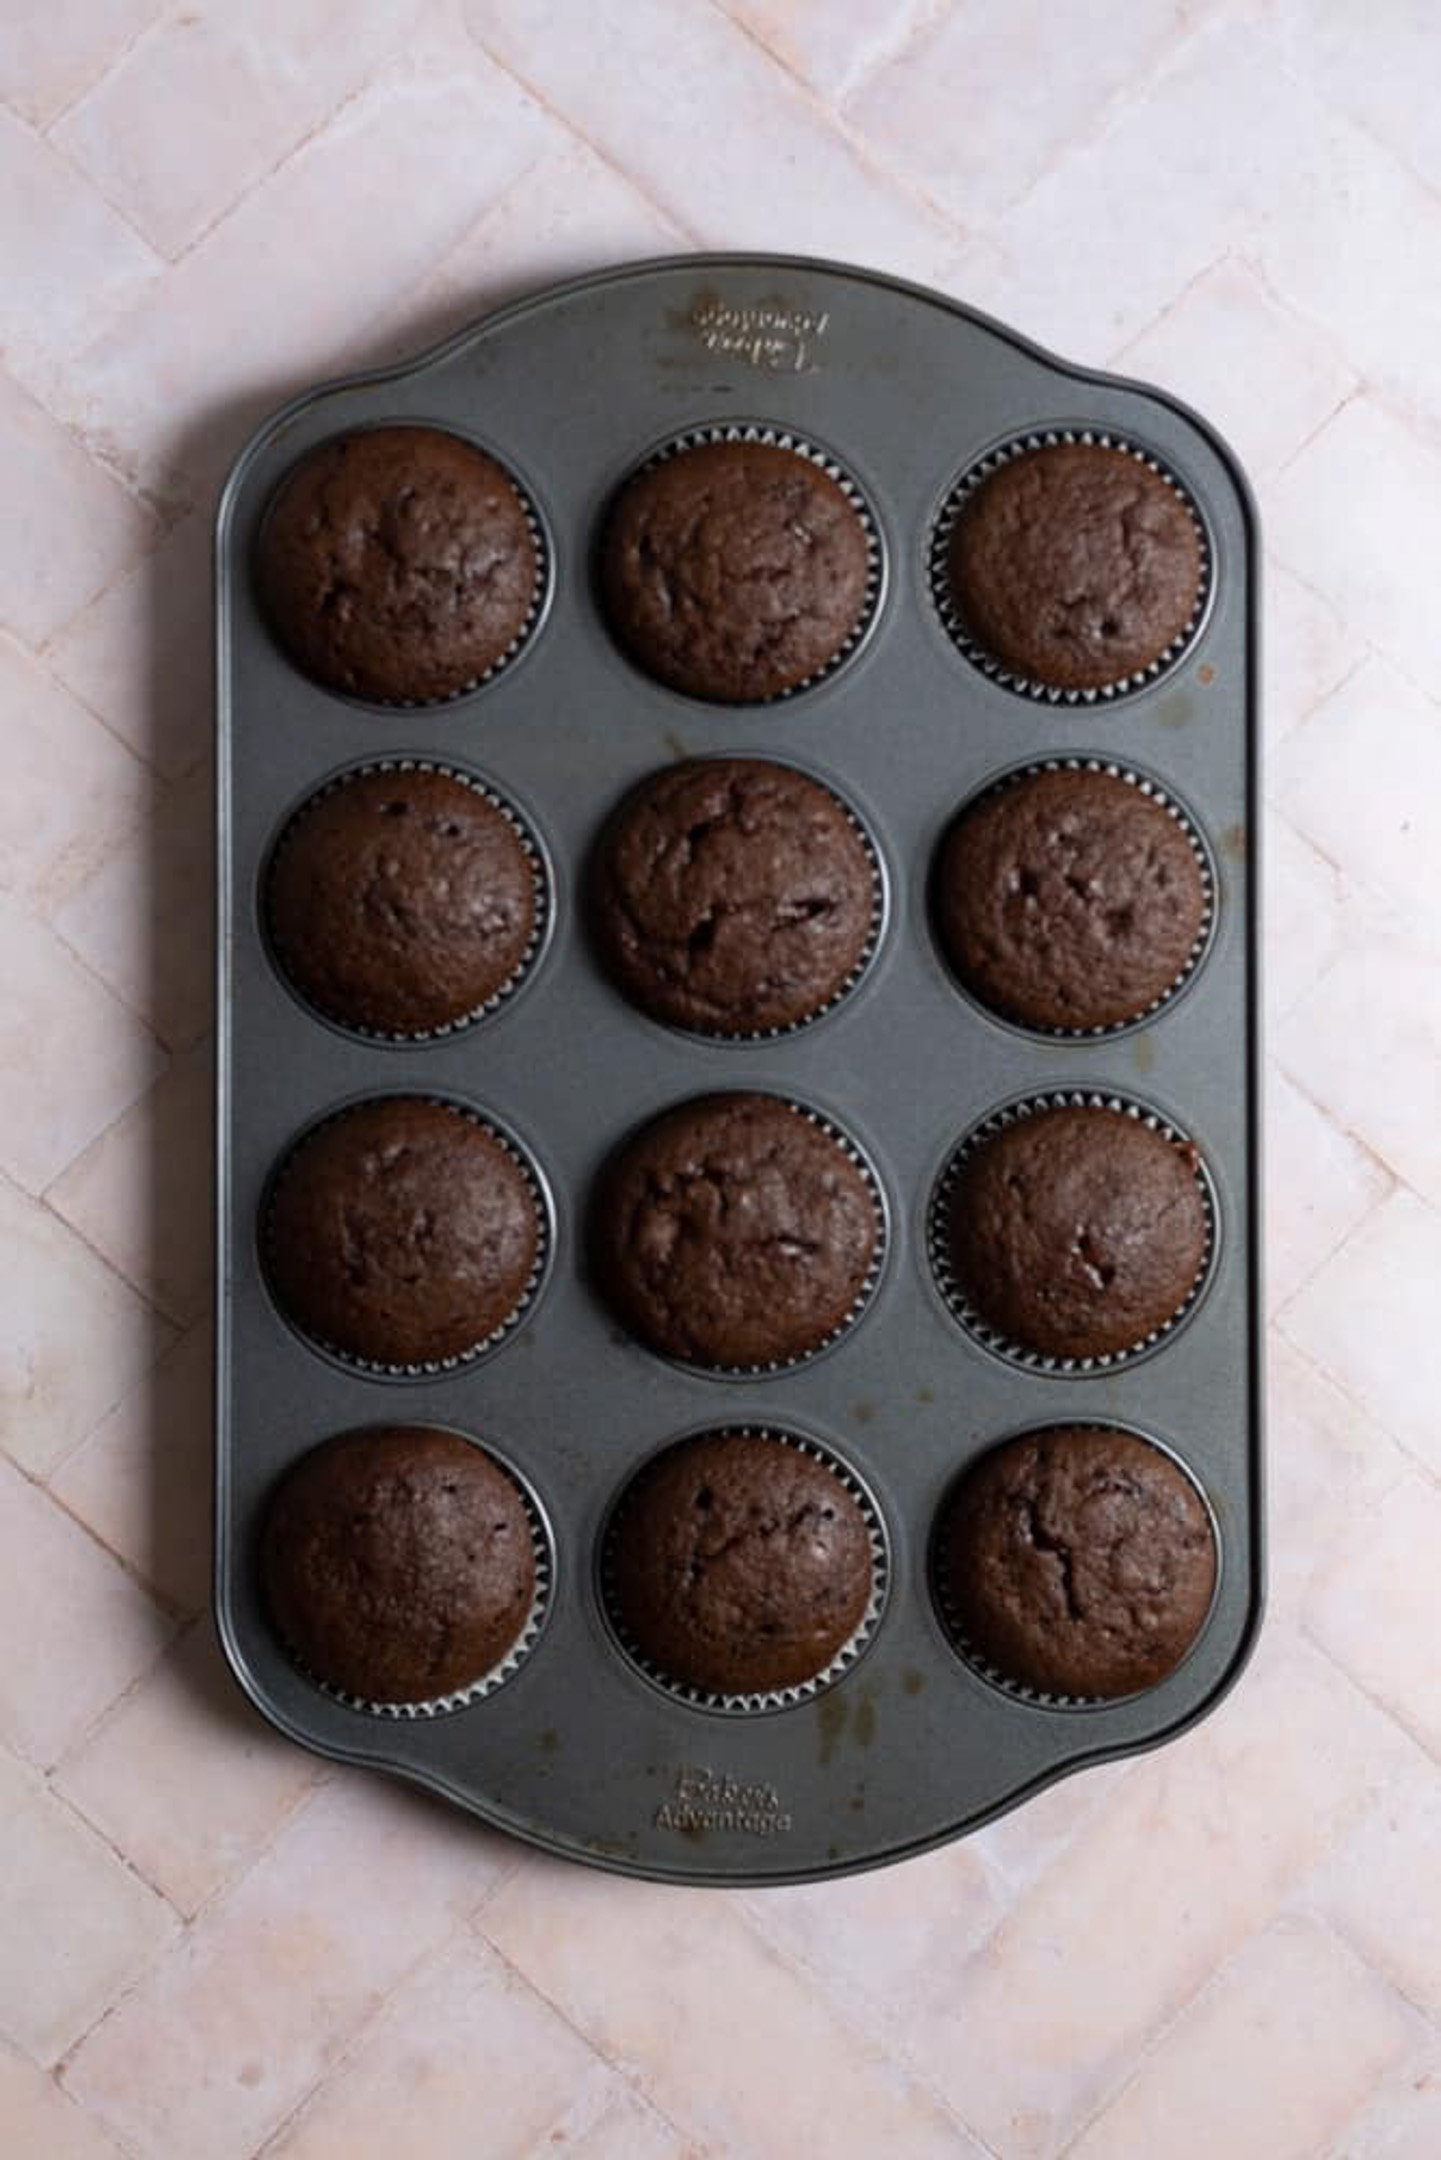 Baked chocolate cupcakes in a muffin tin.